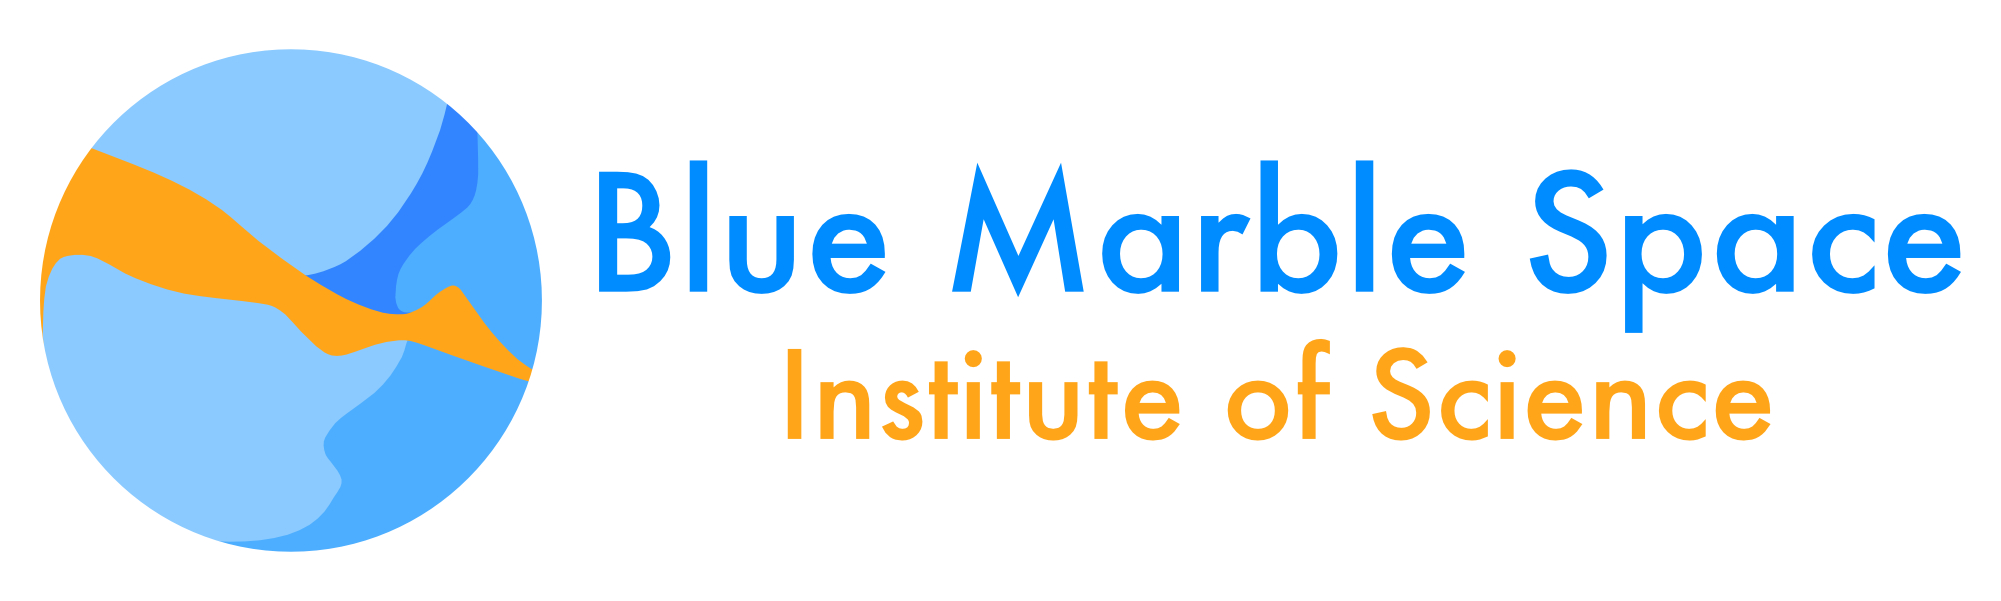 Blue Marble Space Institute of Science logo